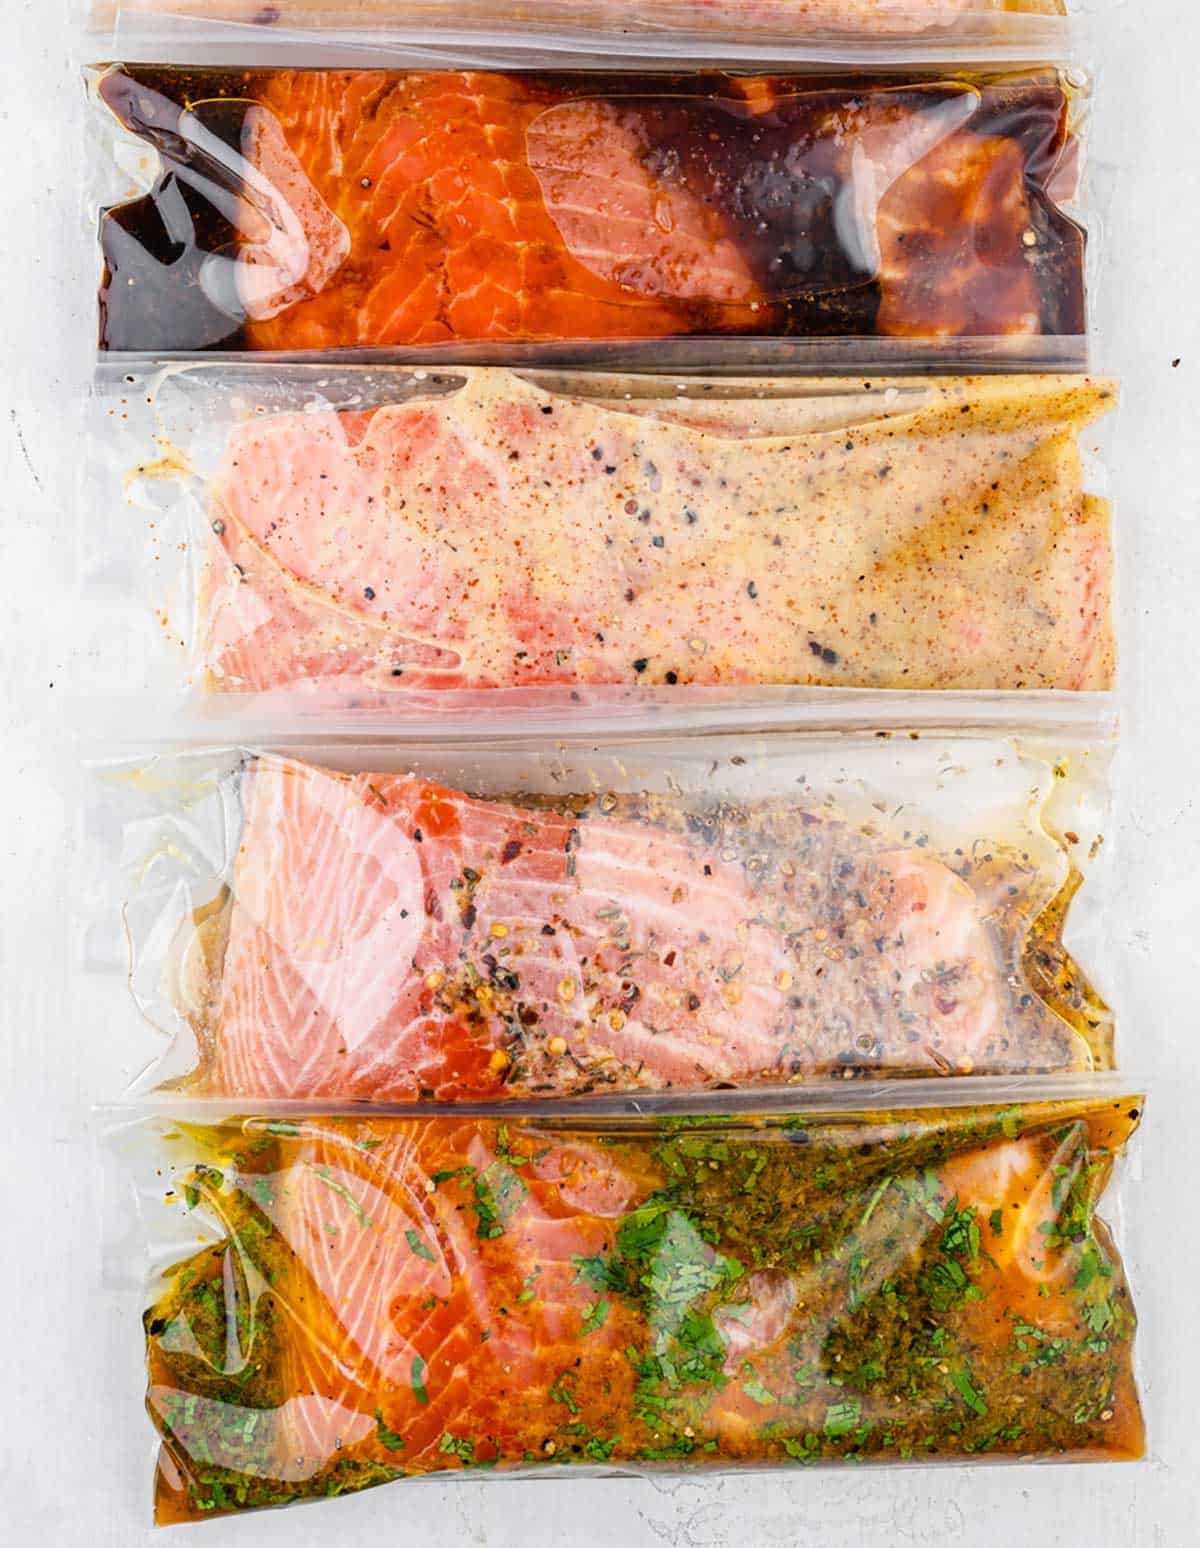 Salmon fillets in plastic bags with marinade